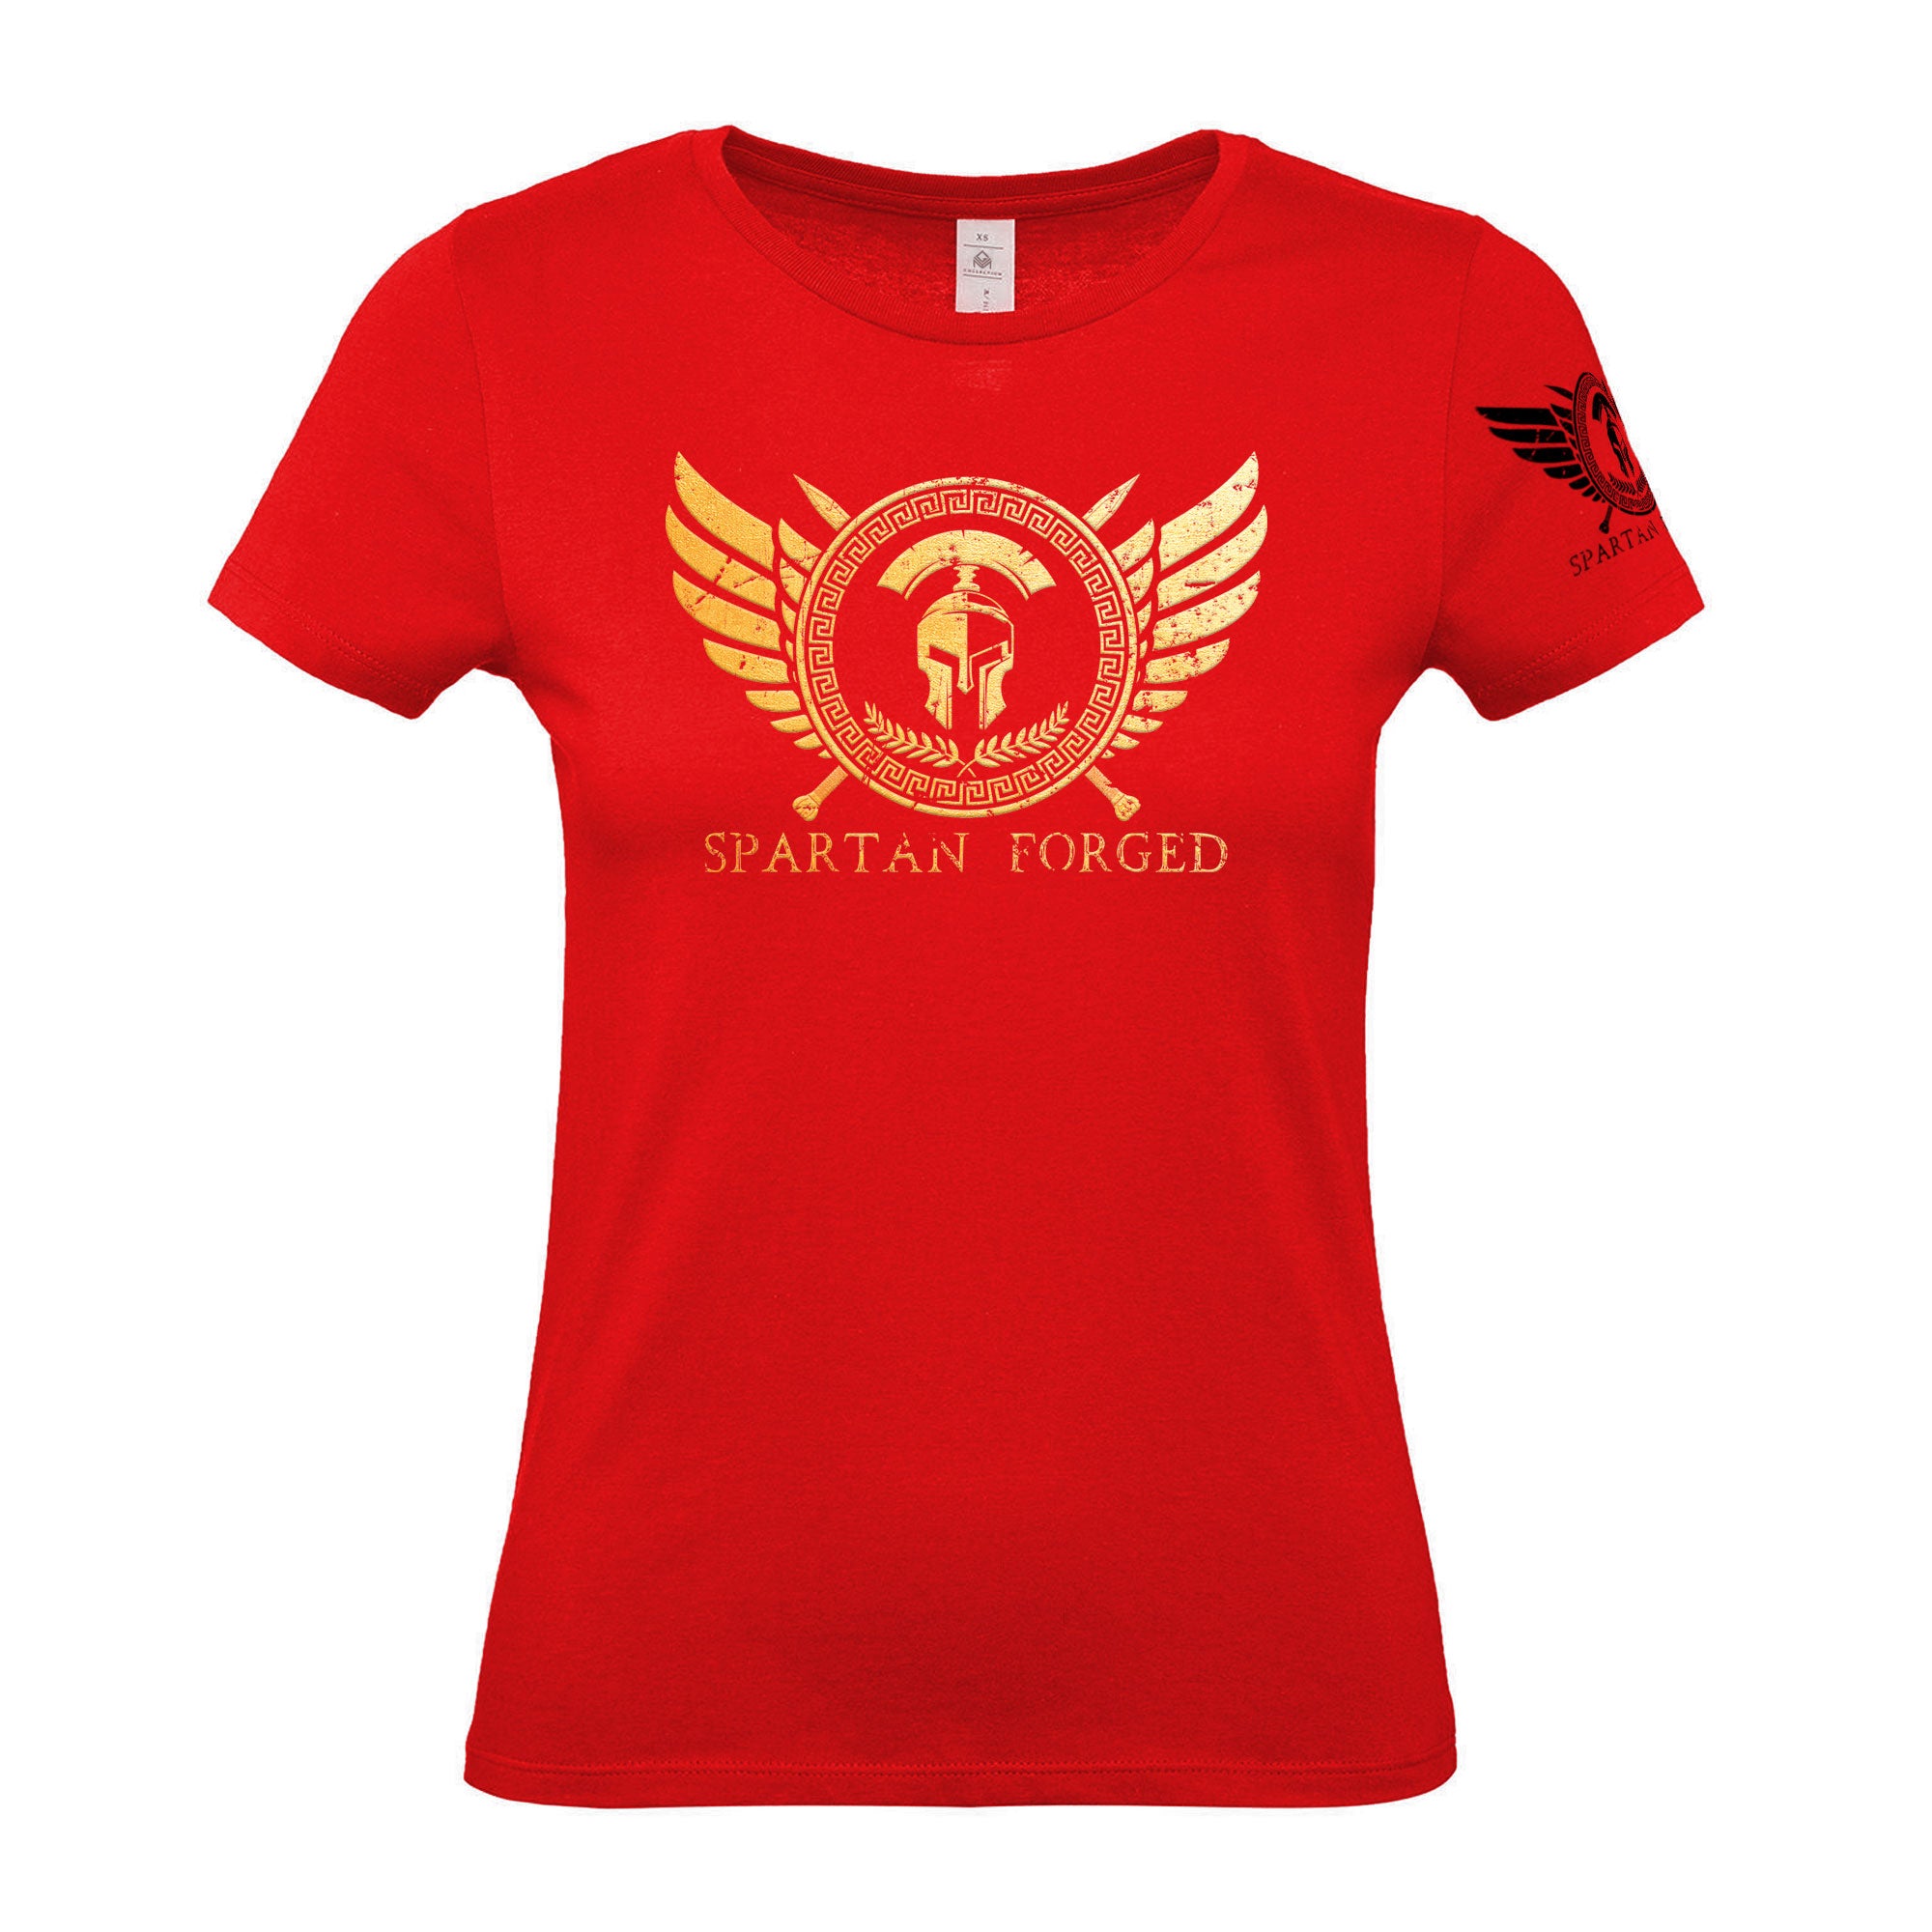 Spartan Forged Chest Gold - Women's Gym T-Shirt